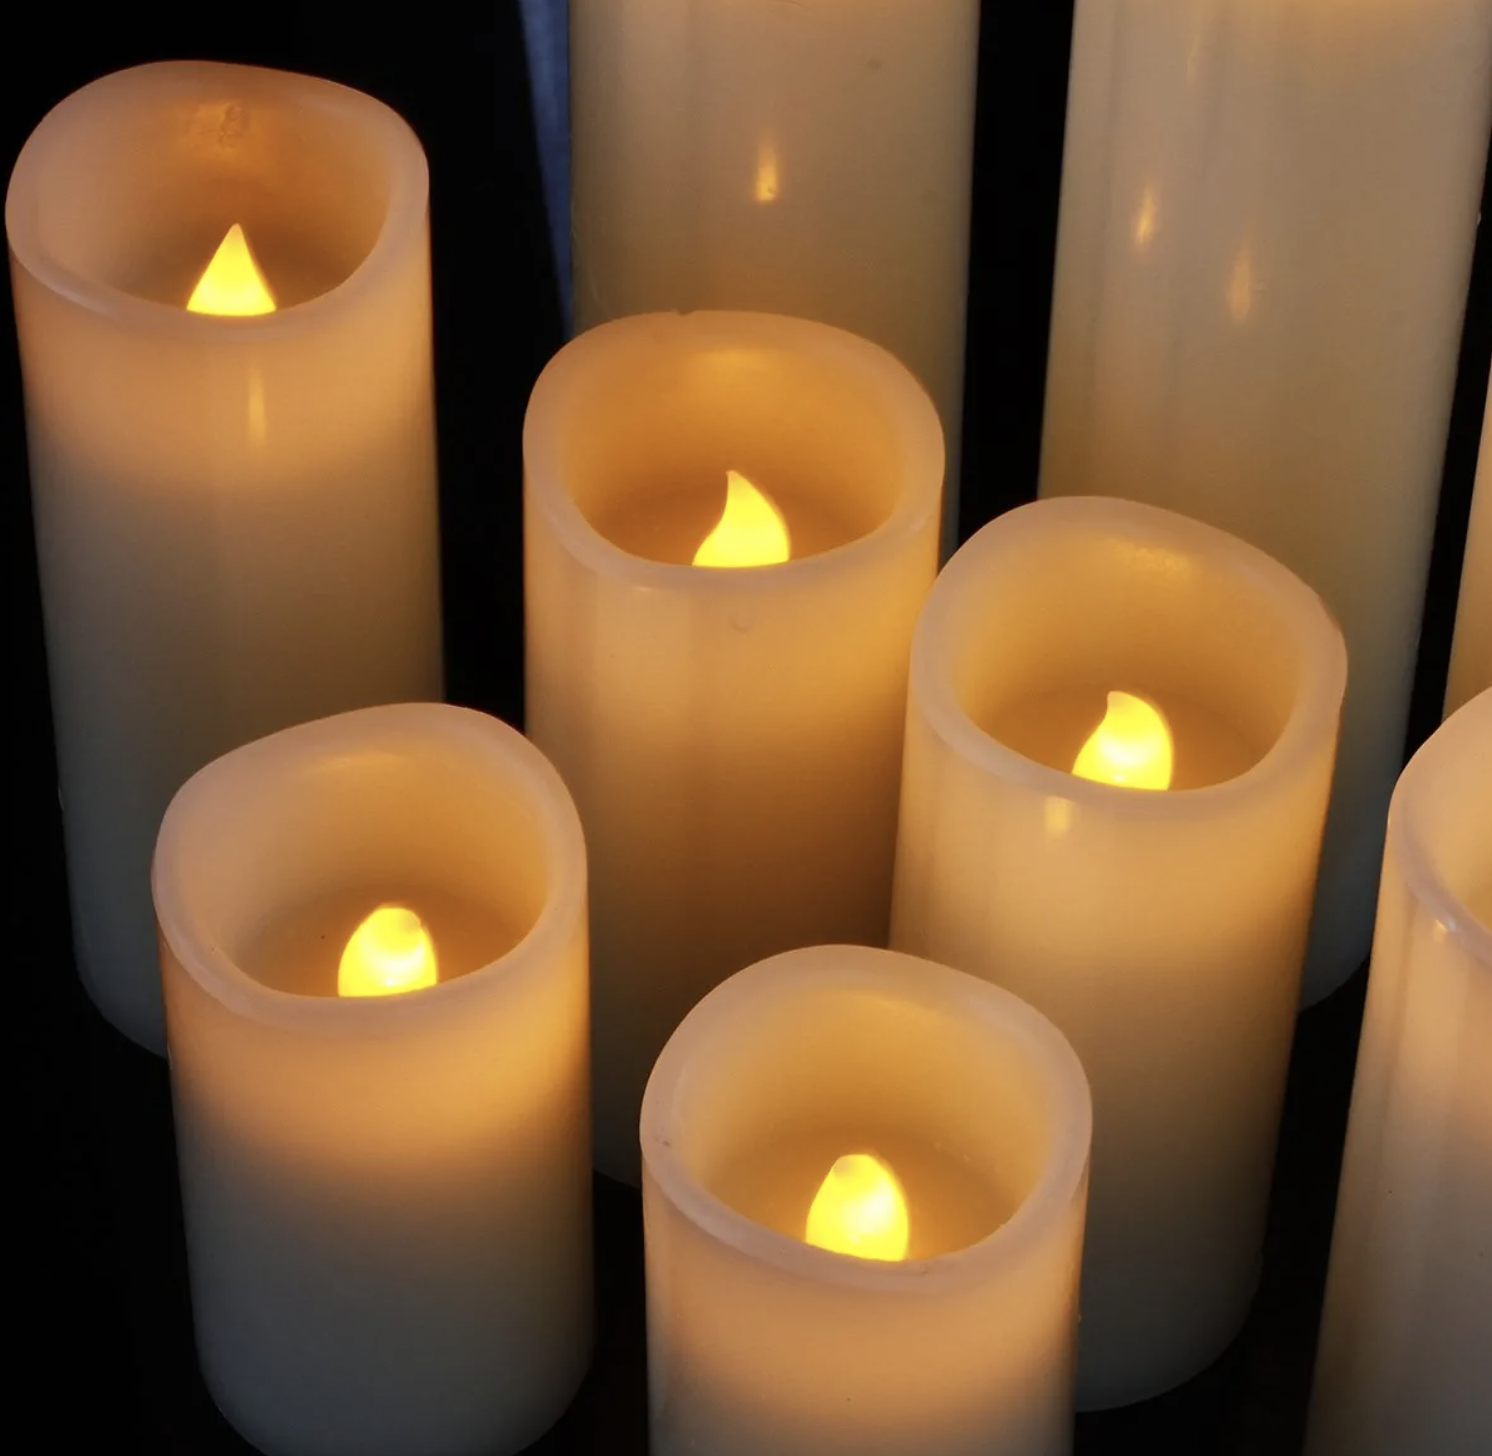 the flameless LED candles